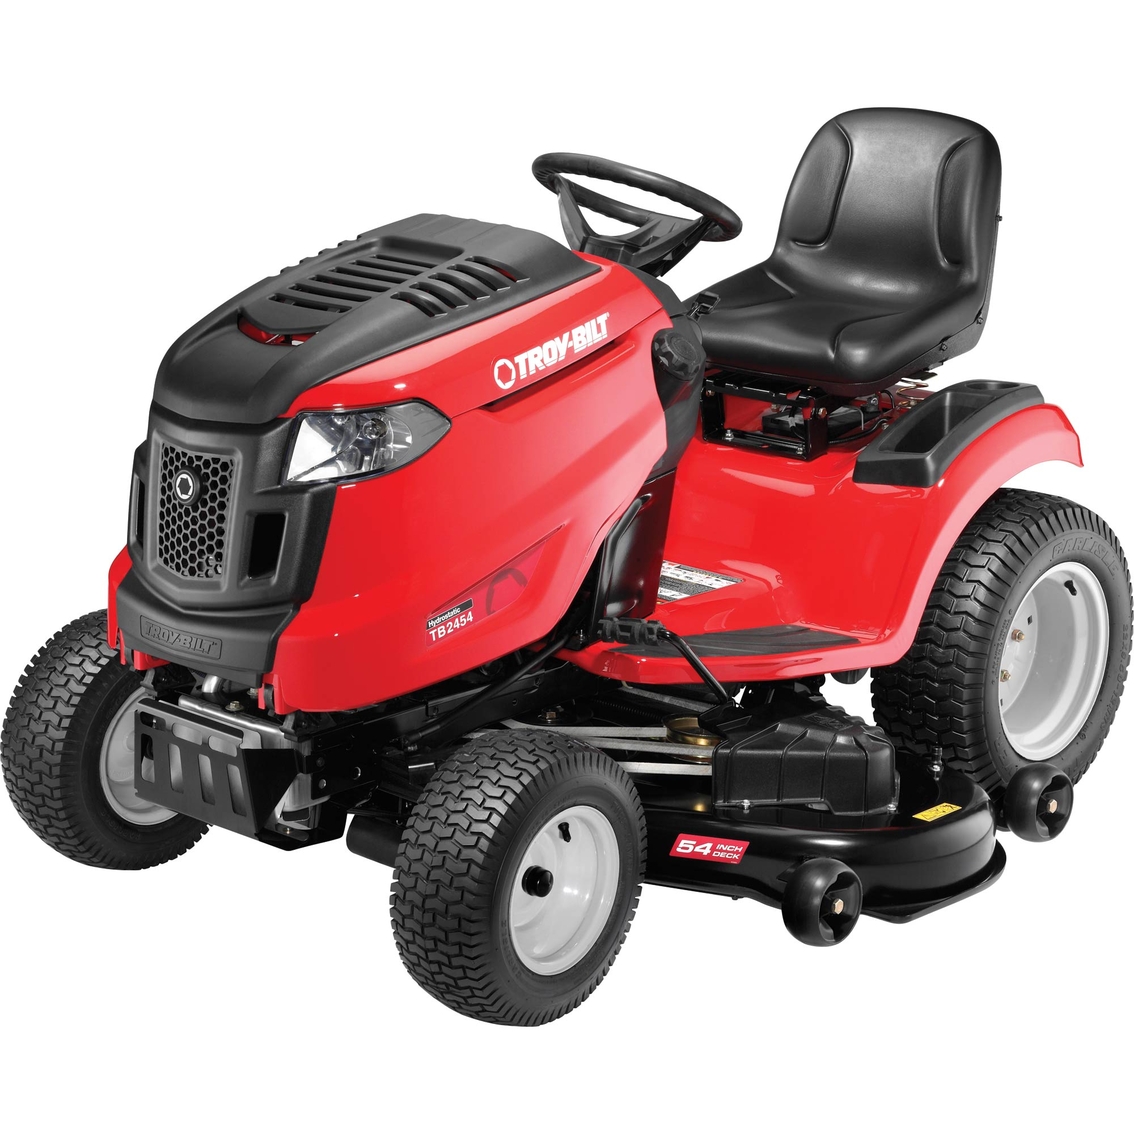 Troy-Bilt 54 in. Riding Mower - Image 2 of 2